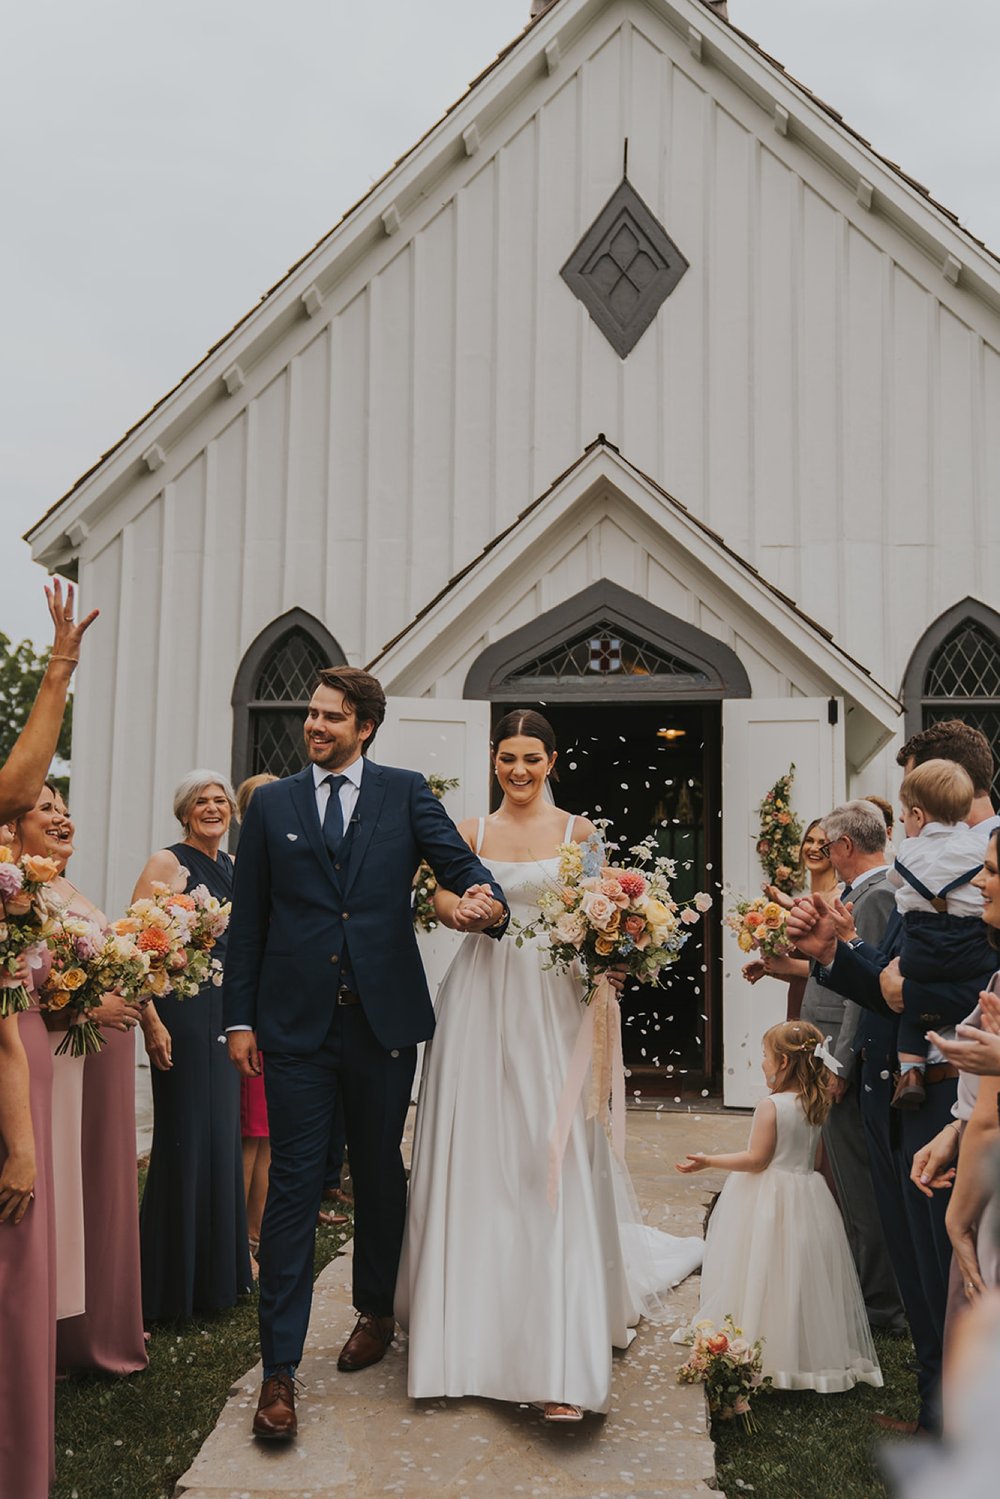 Wedding guests throwing petals over bride and groom outside chapel